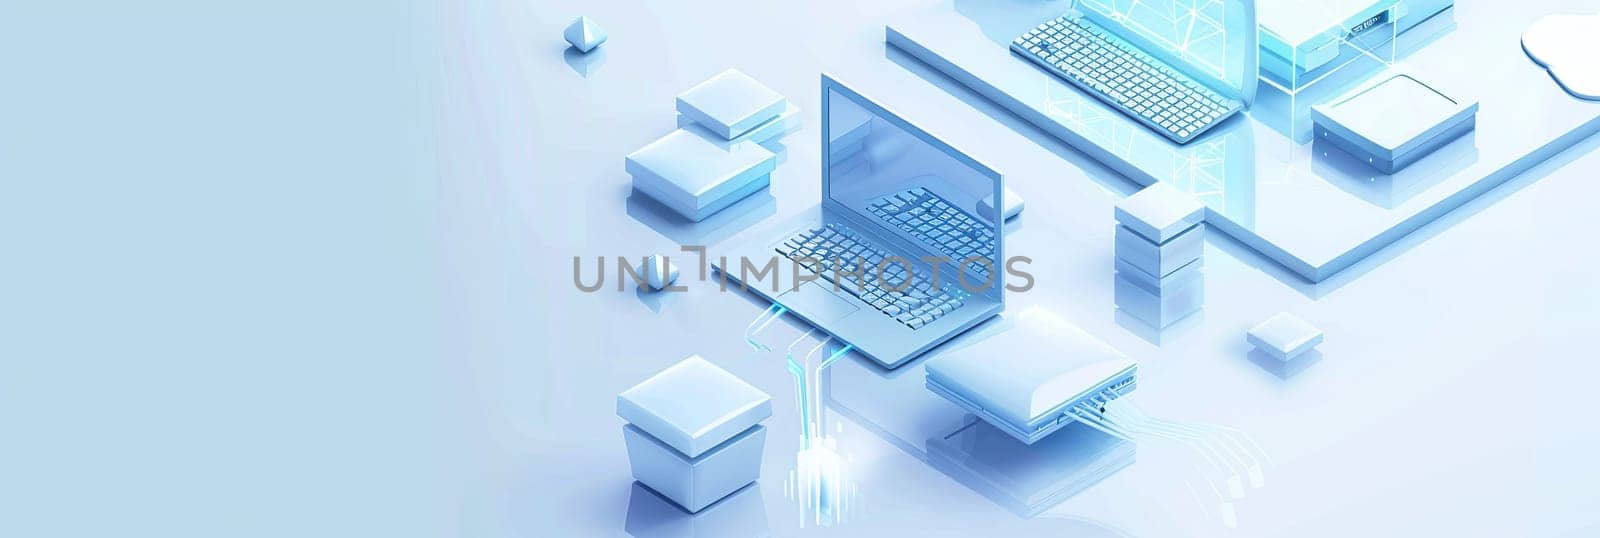 Isometric laptop icon on a blue and white abstract background. Ideal for computer service and tech repair concepts.